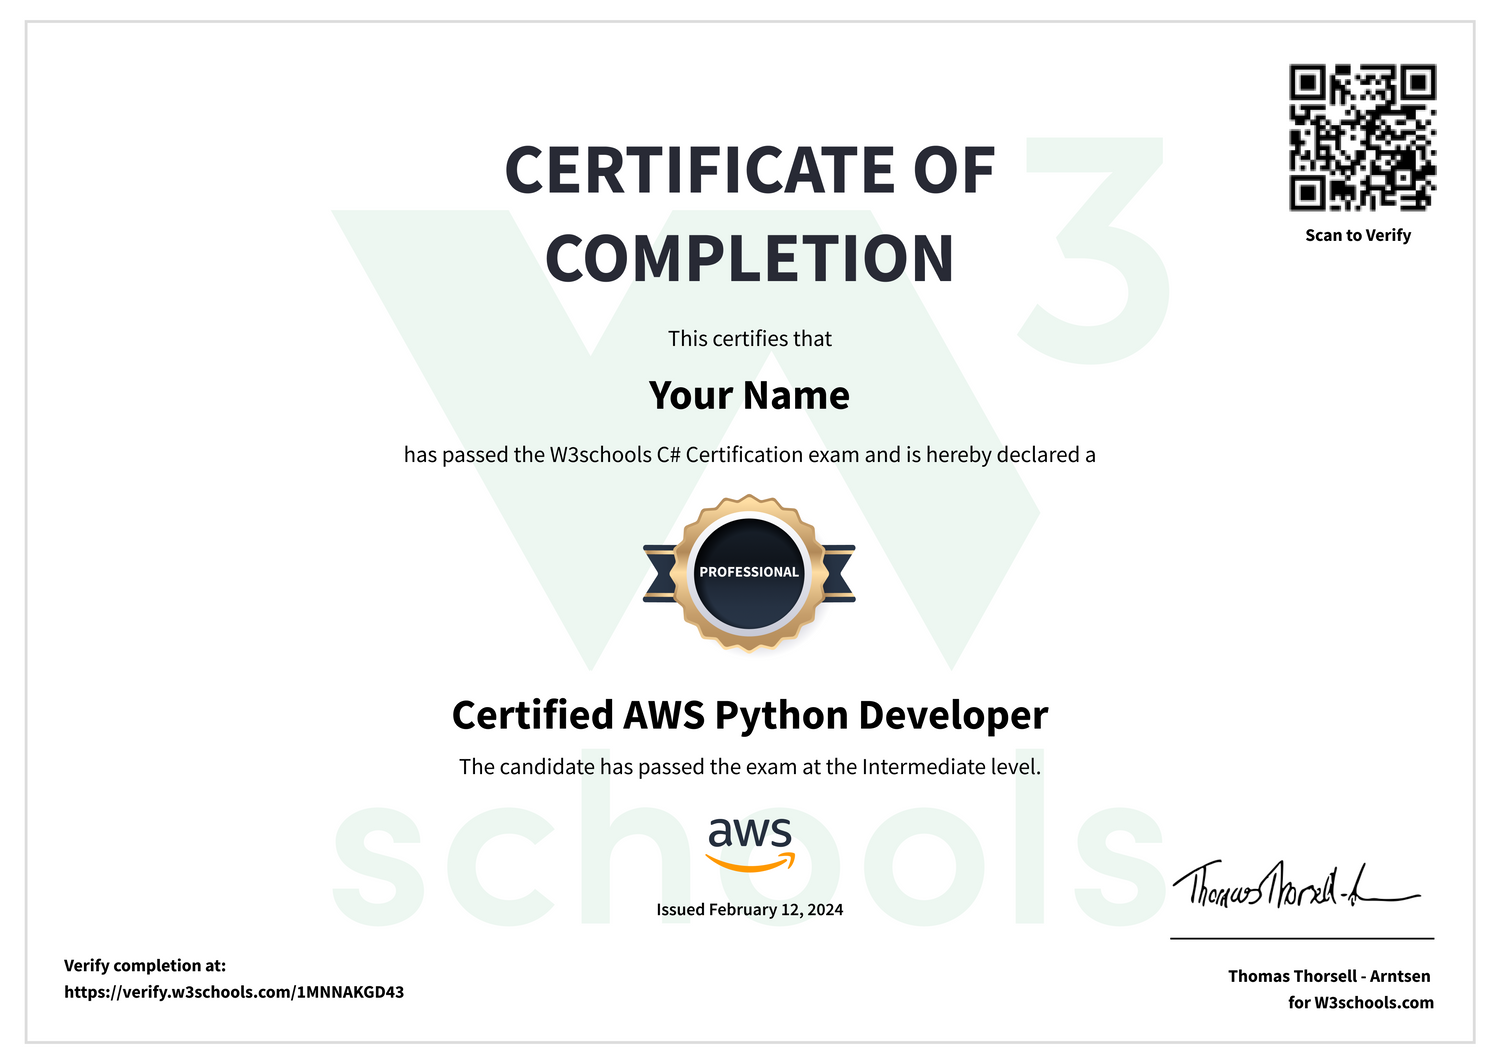 Benefits of AWS Python Certificate: